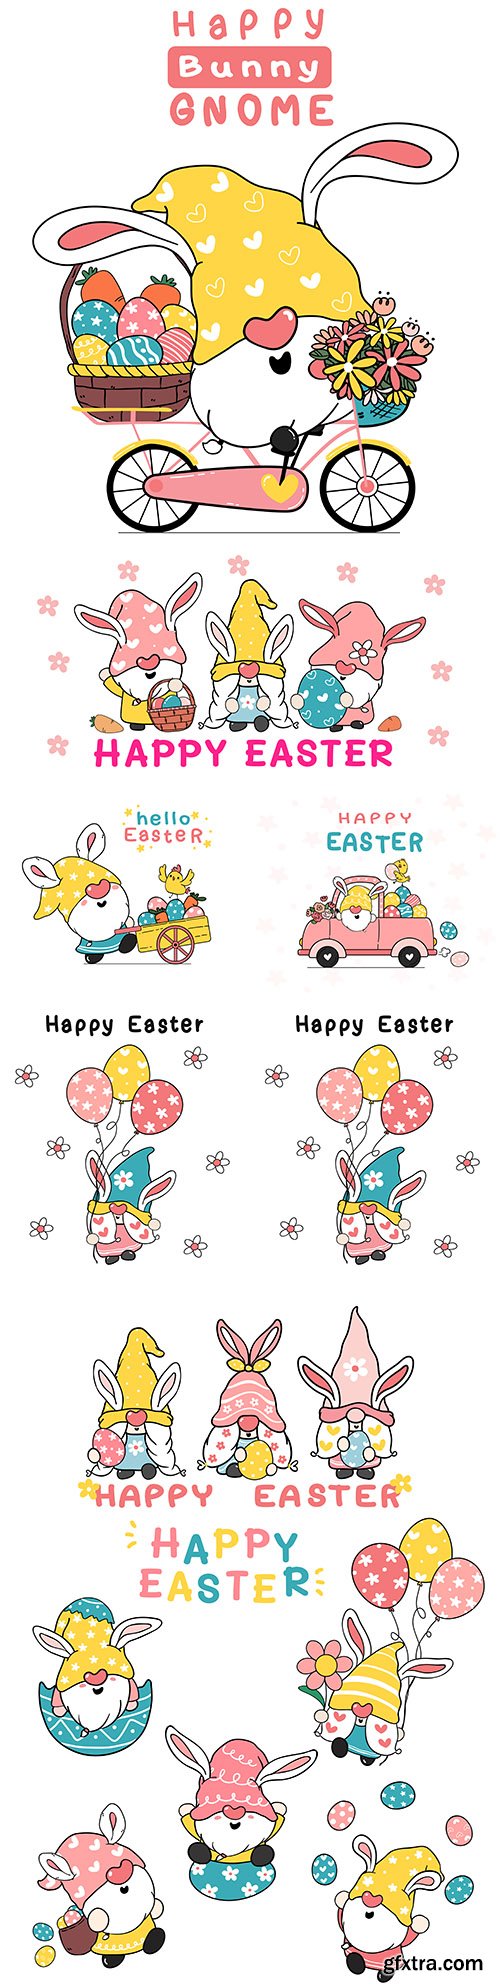 Cute Easter gnome rabbit with ears and flowers illustration